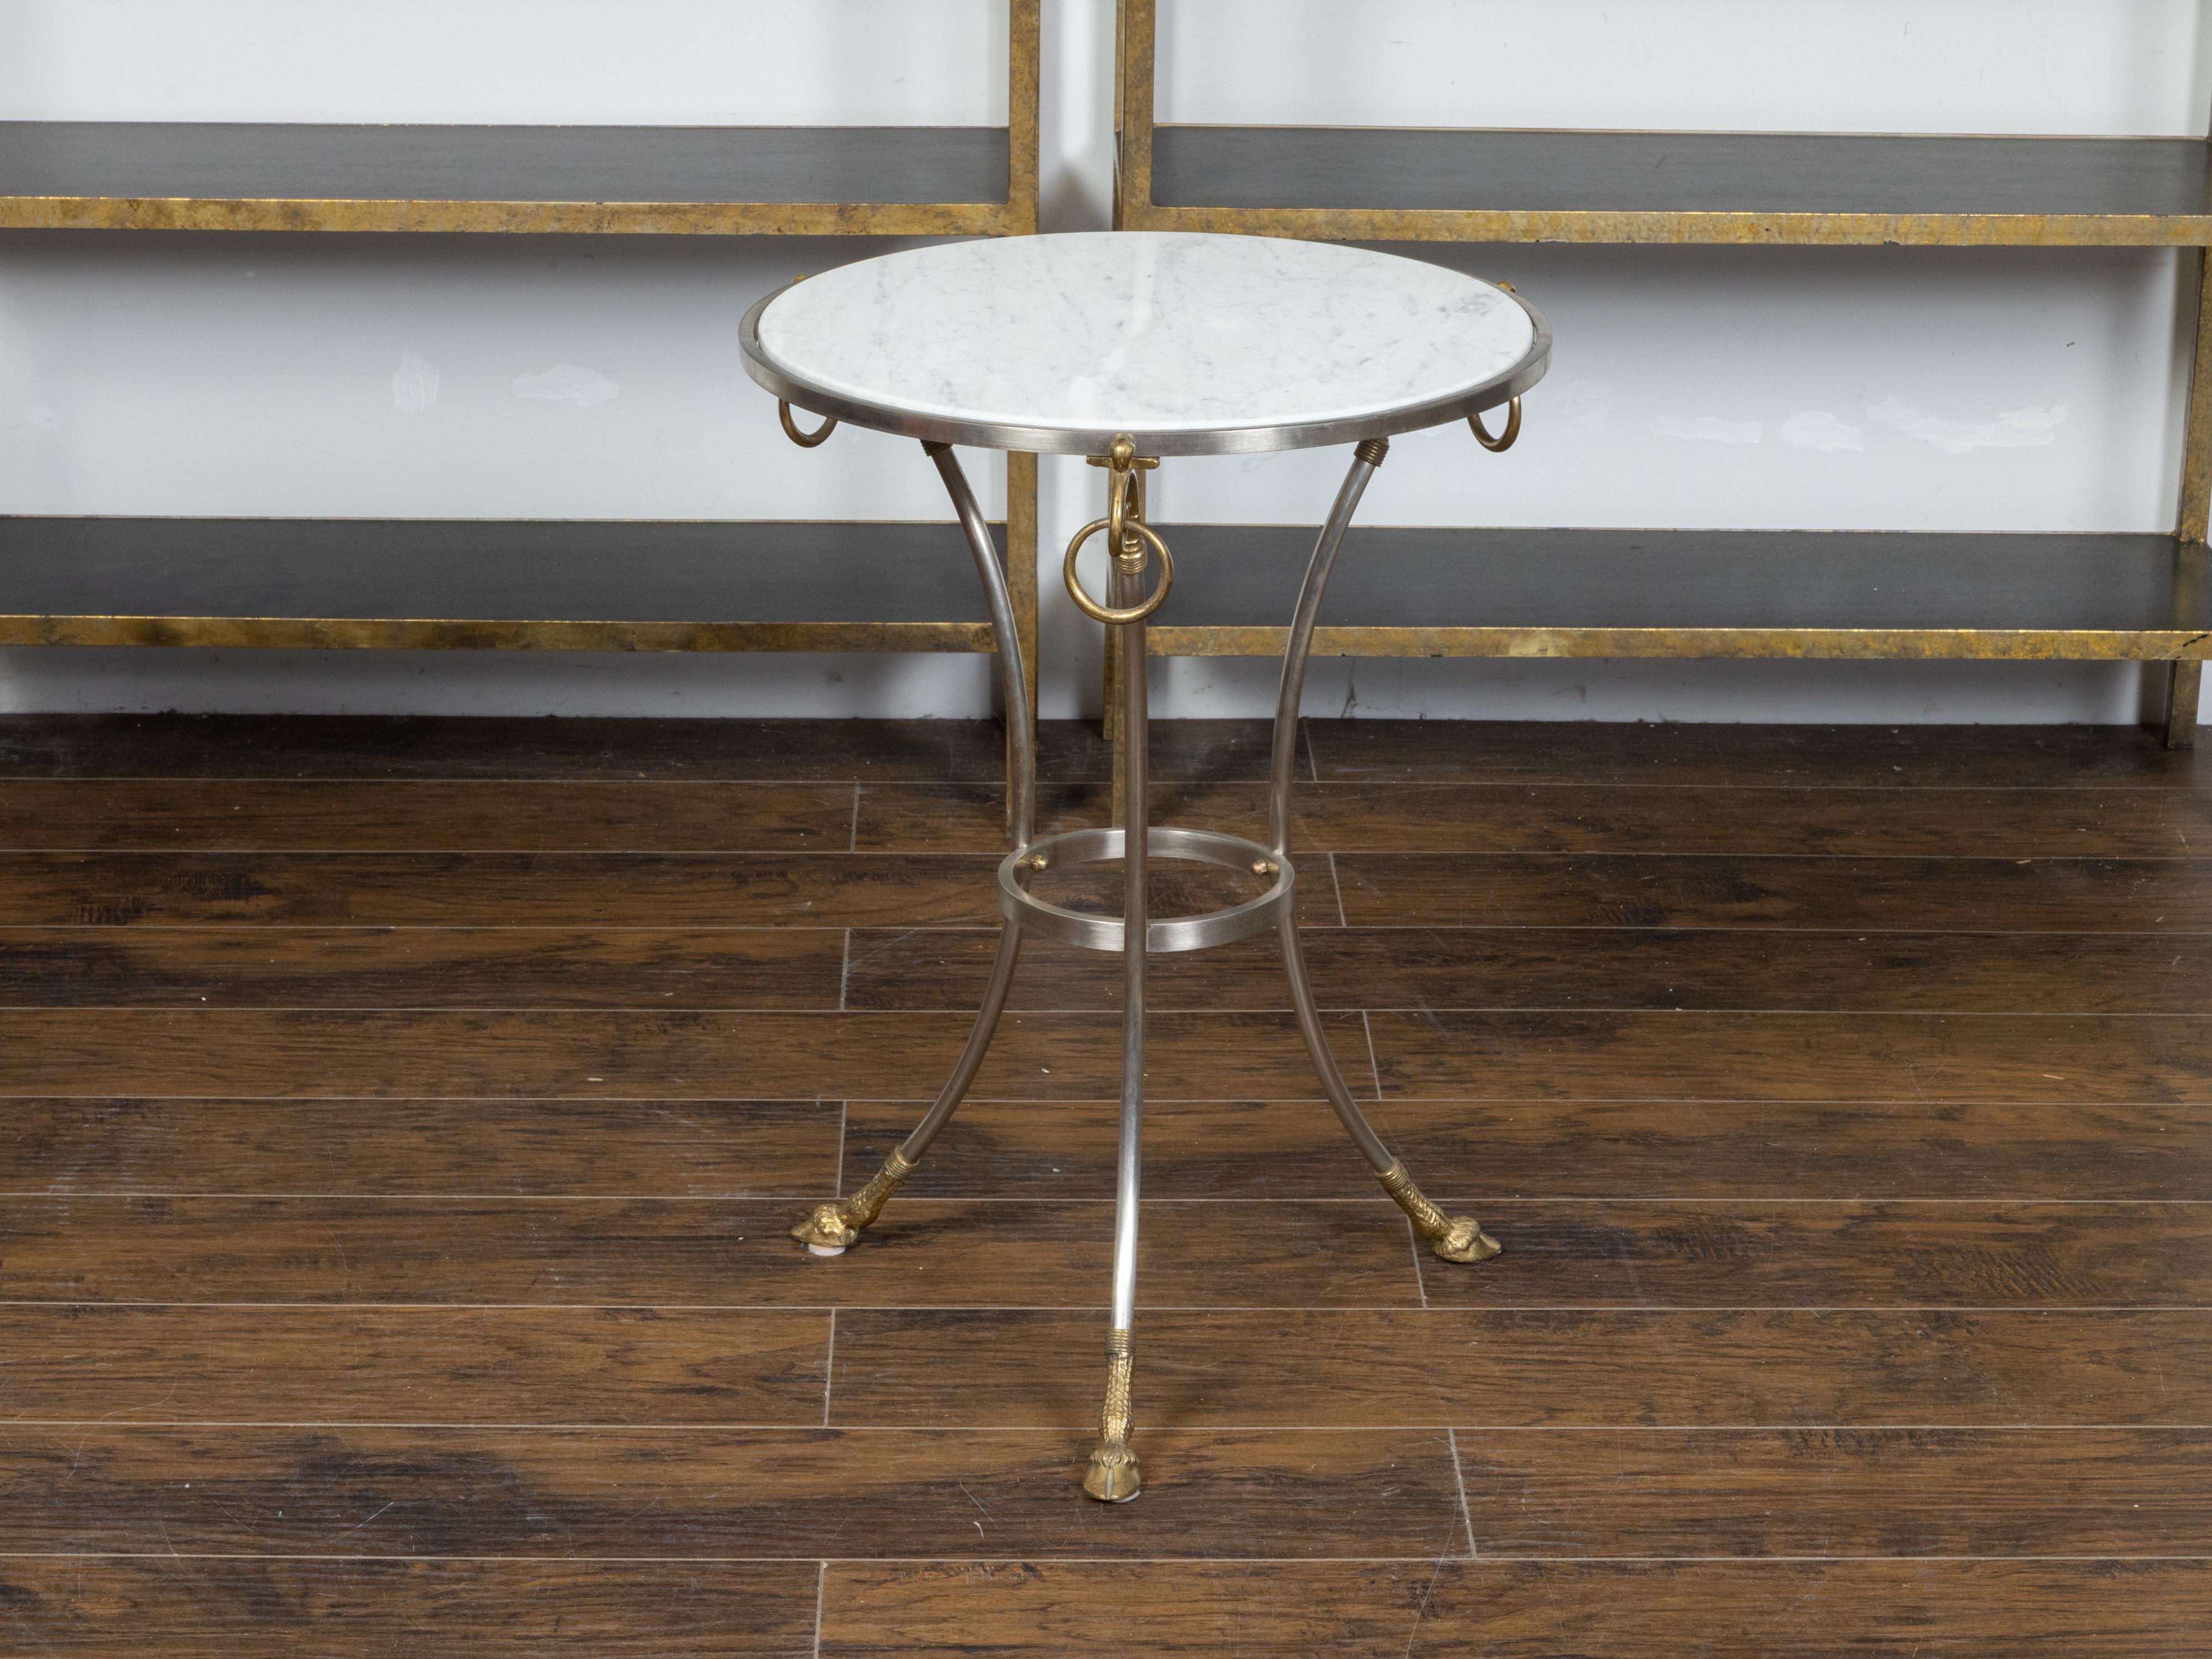 A vintage Italian Maison Jansen style steel and brass side table from the mid 20th century with white veined round shaped marble top, ring pulls, lower ring and hoof feet. Created in Italy during the Midcentury Modern period, this Maison Jansen